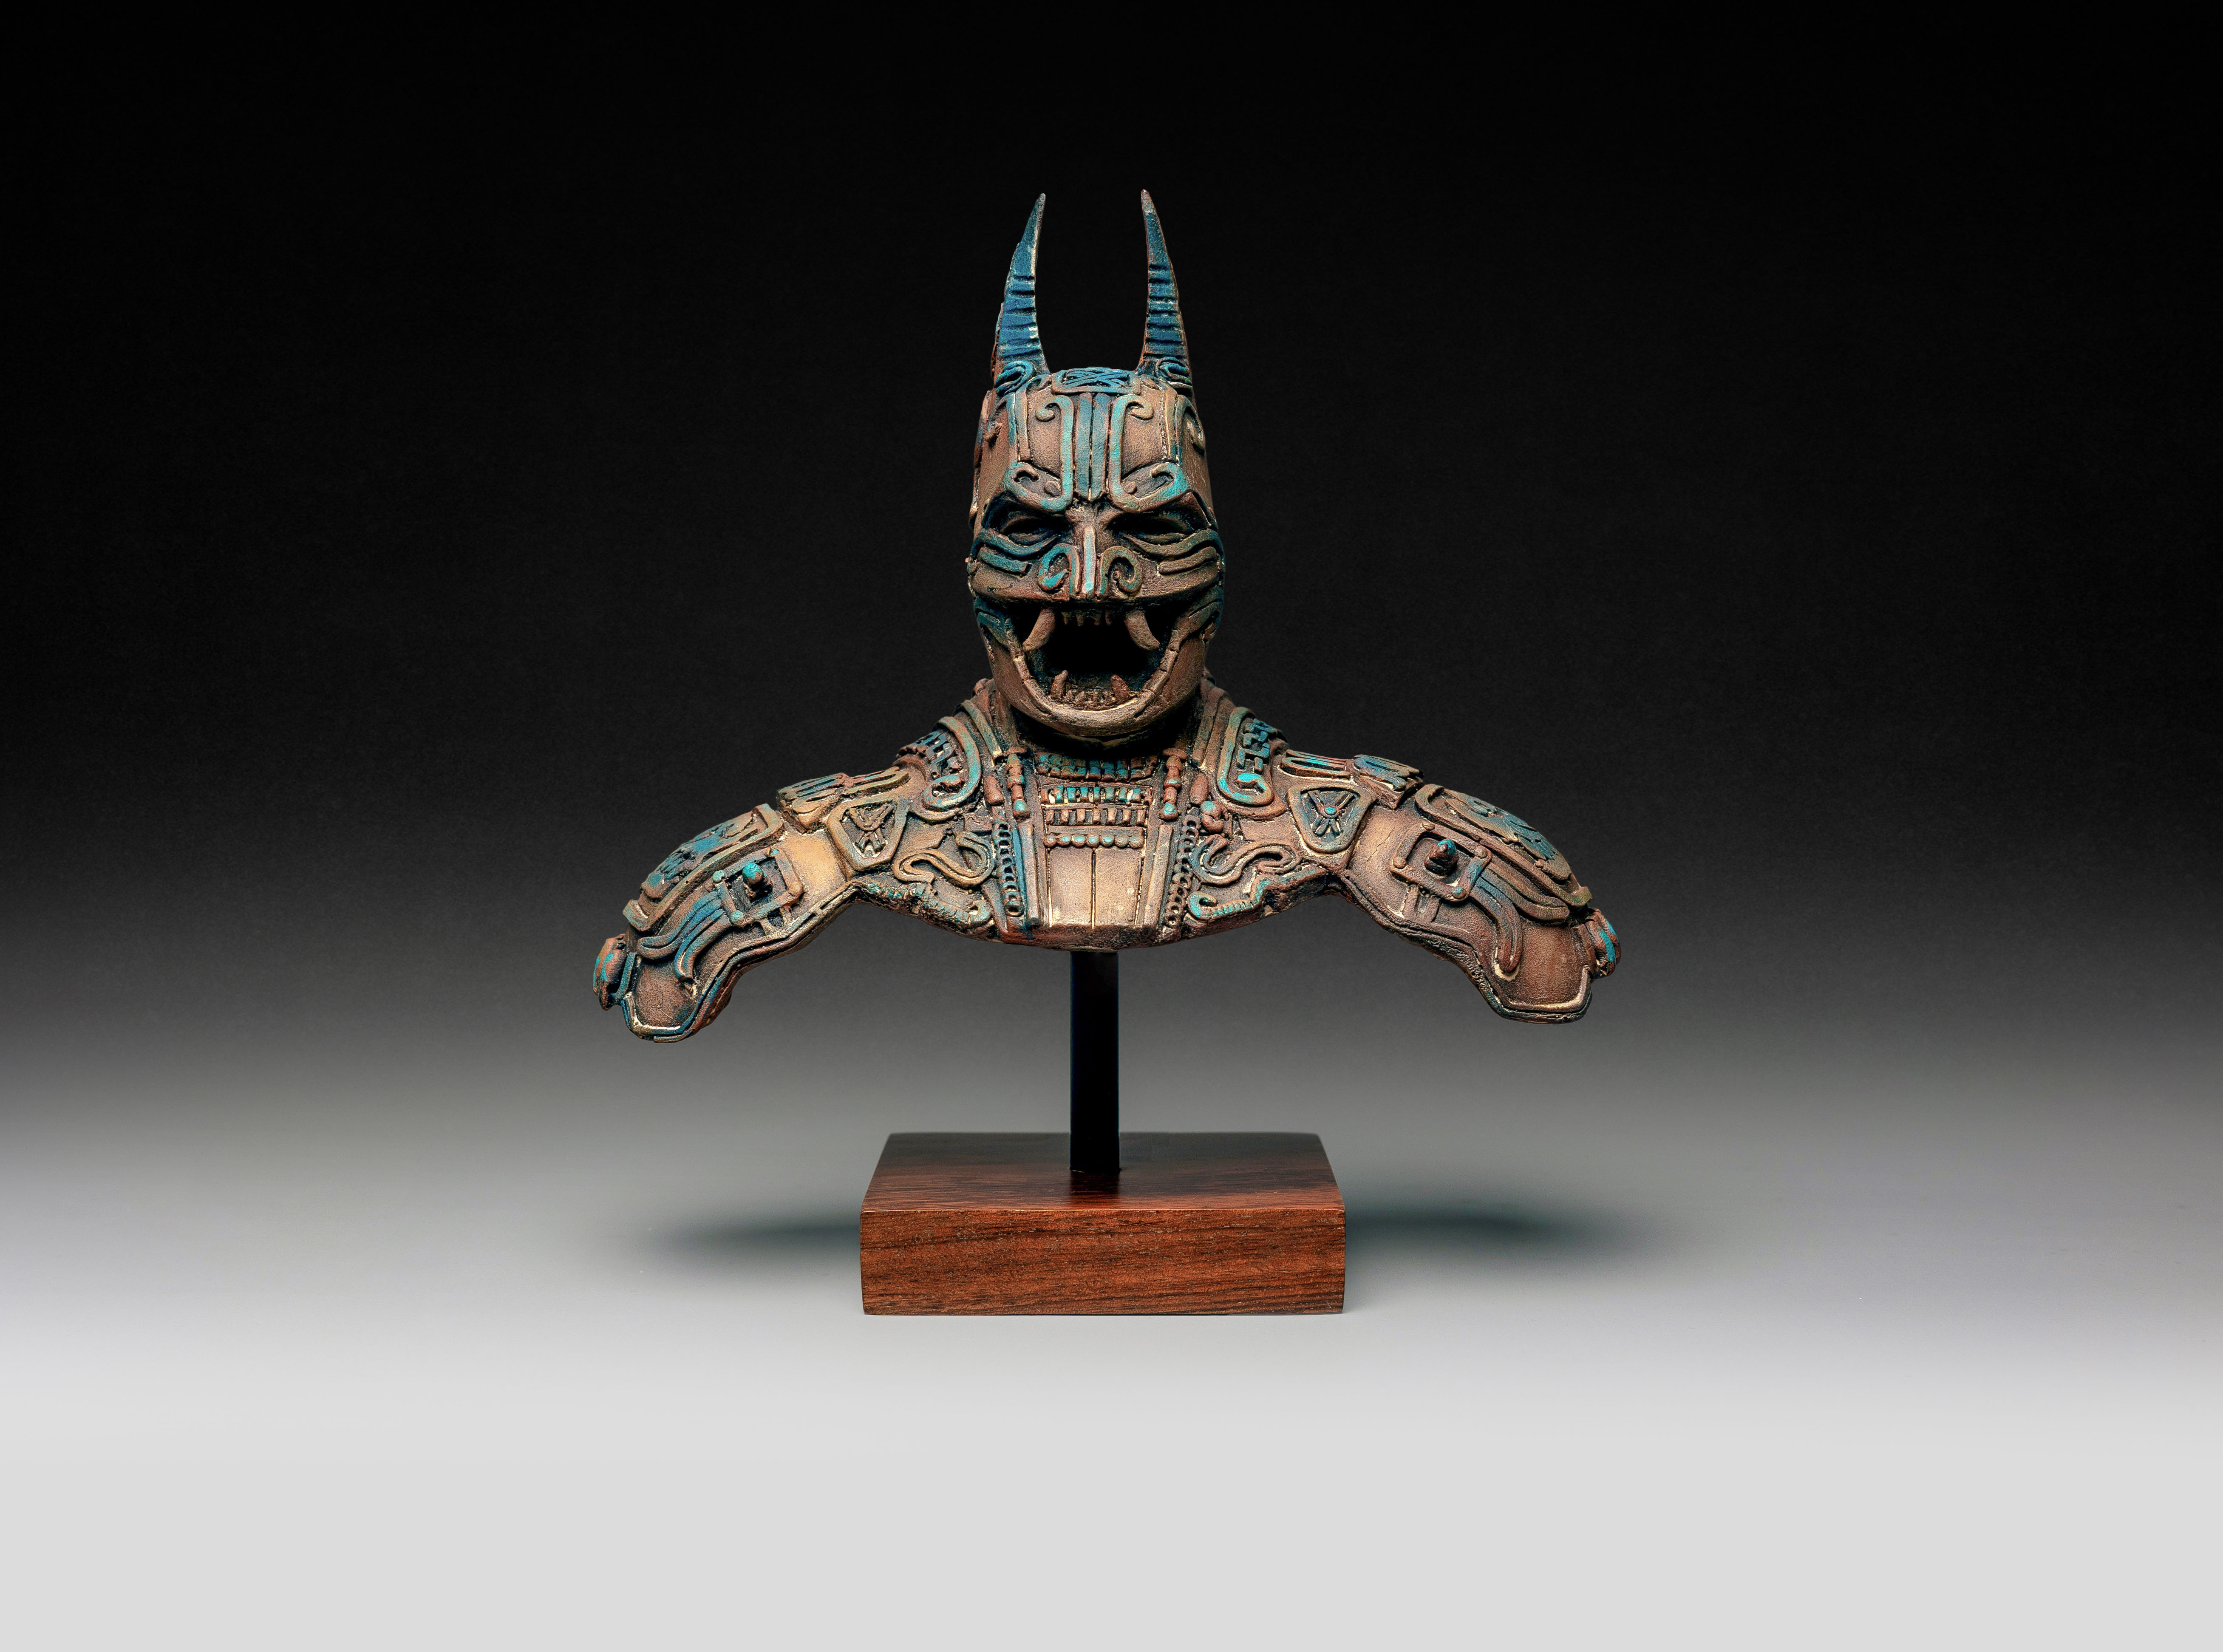 Camazotz and arises from the K'iche' words: kame "death", and Sotz' "bat". This character was considered to be an underworld being associated with the night and ritual sacrifice. He is even mentioned in the sacred book of the Popol Vuh.